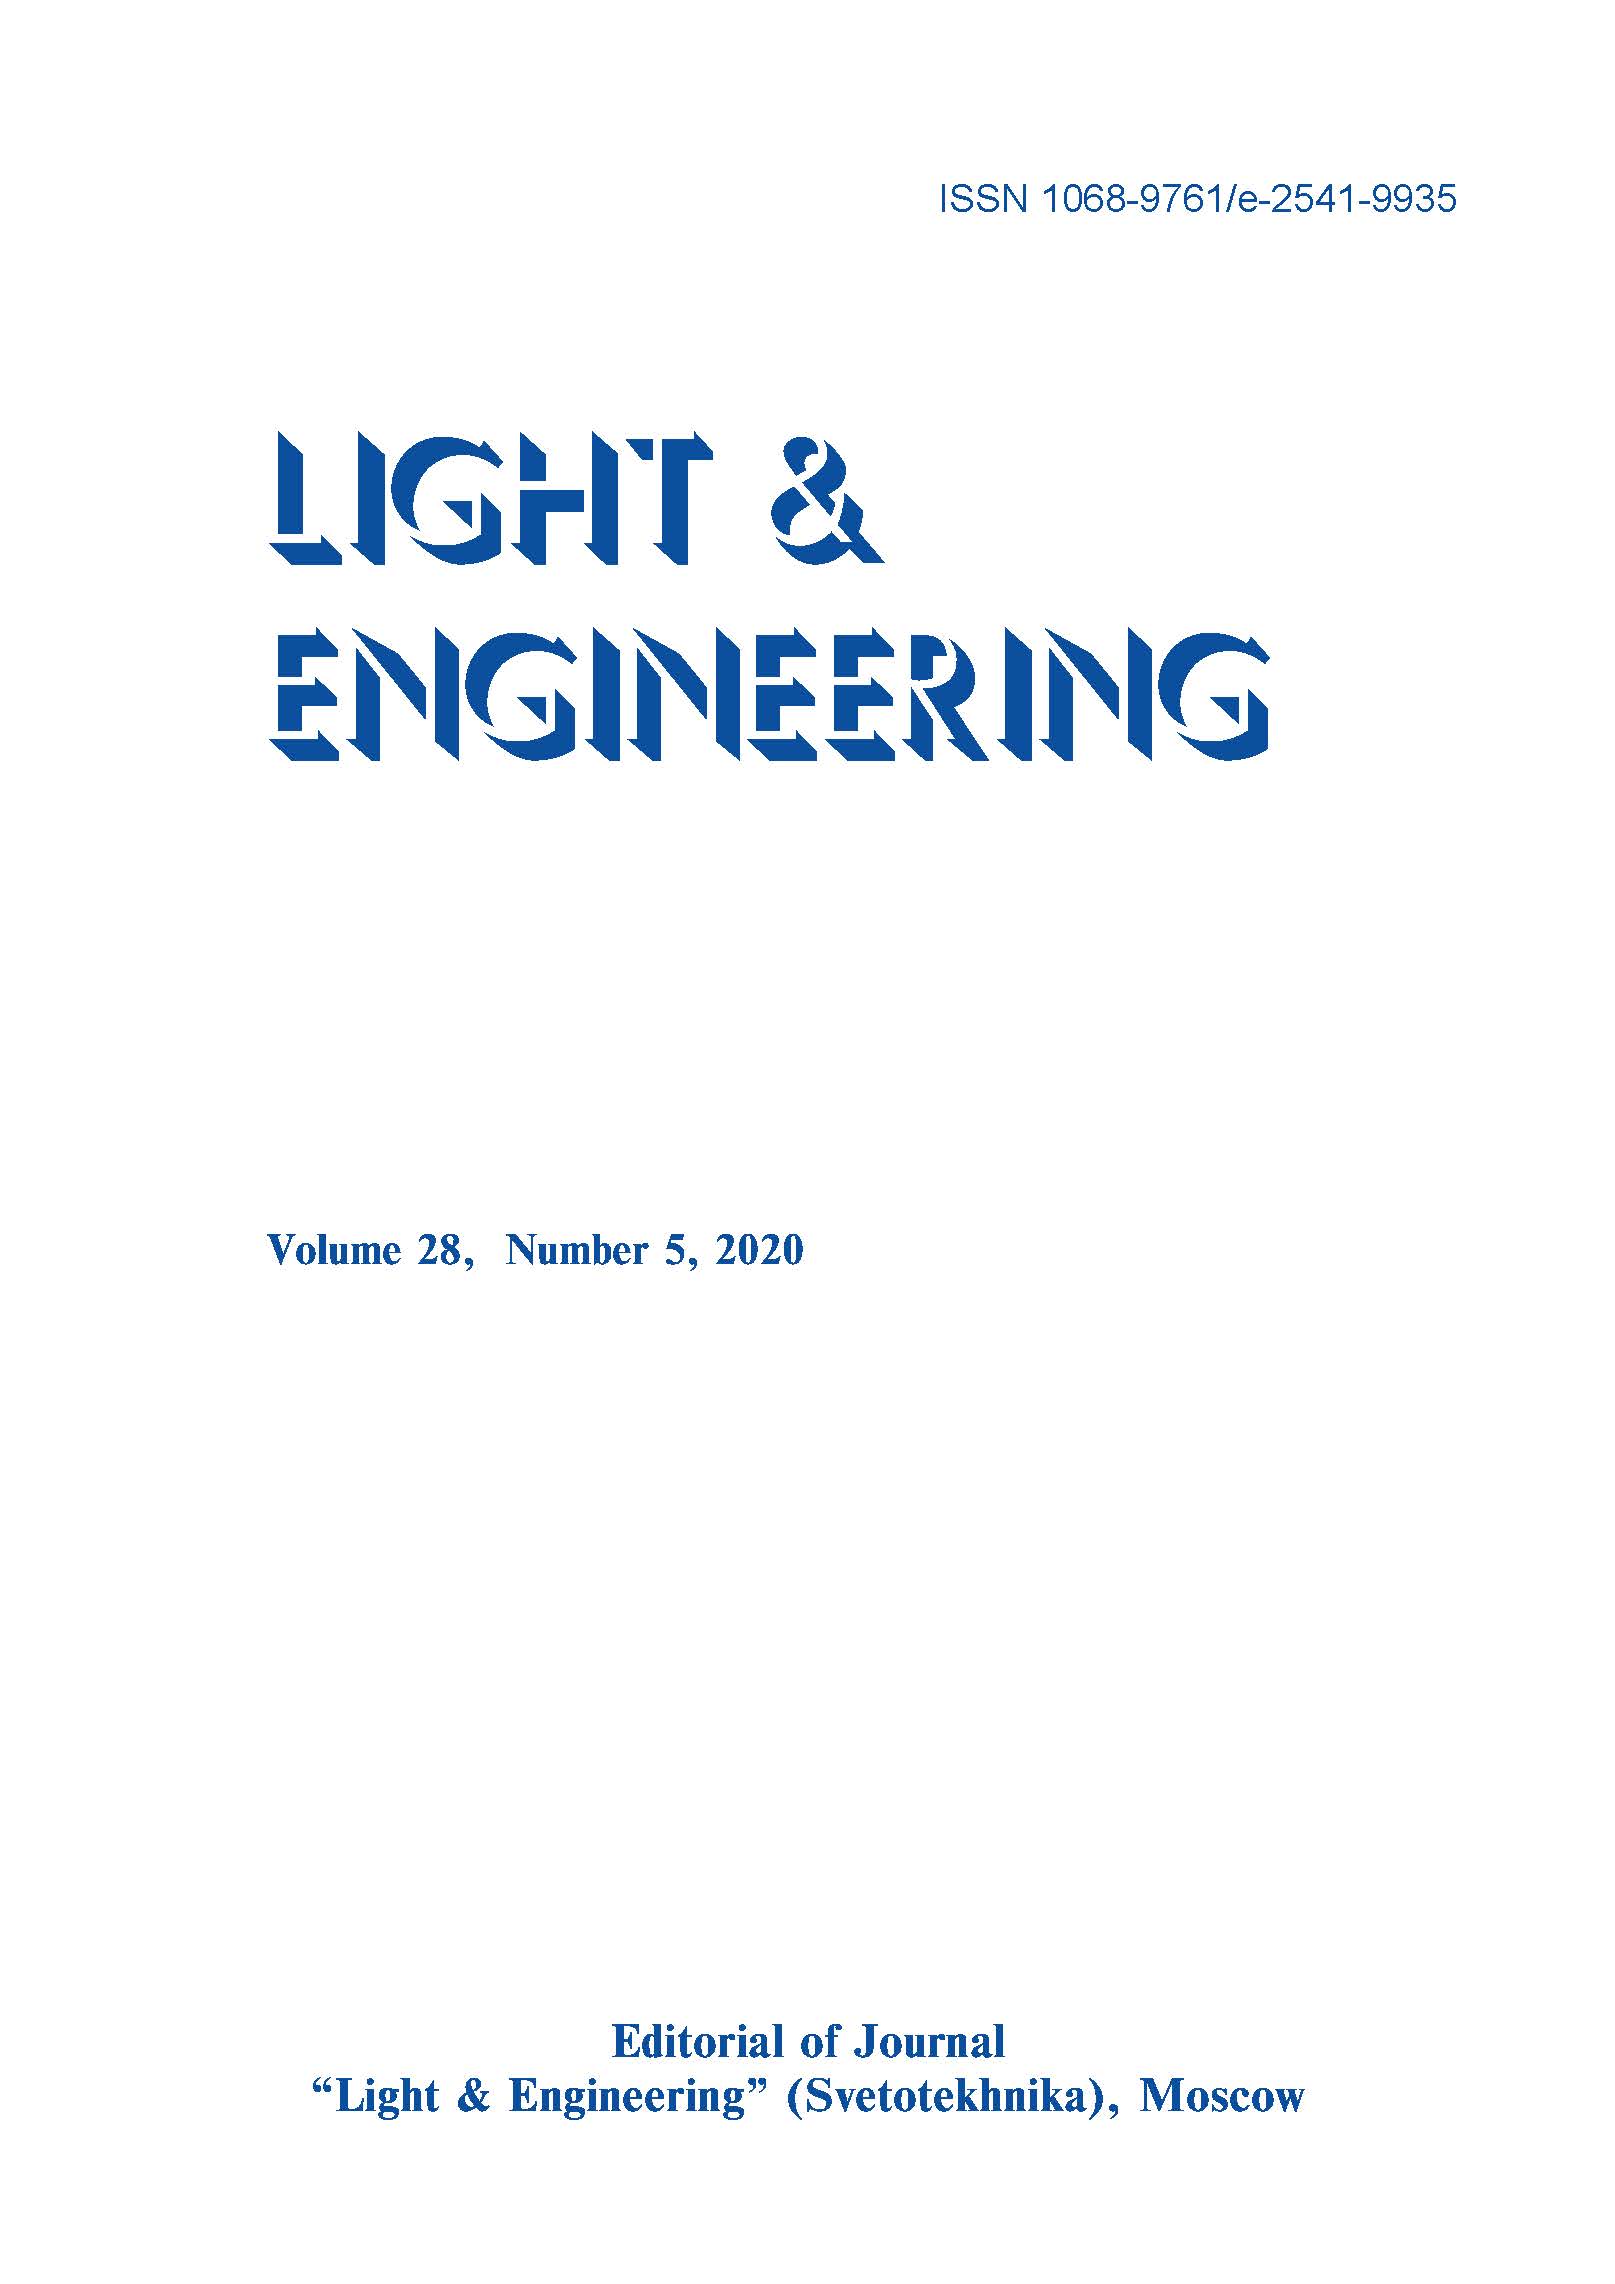 New Rules Of Access To Lighting Technical Products In The Eaeu Market: Compliance With Four Technical Regulations Light & Engineering Vol. 28, No. 5